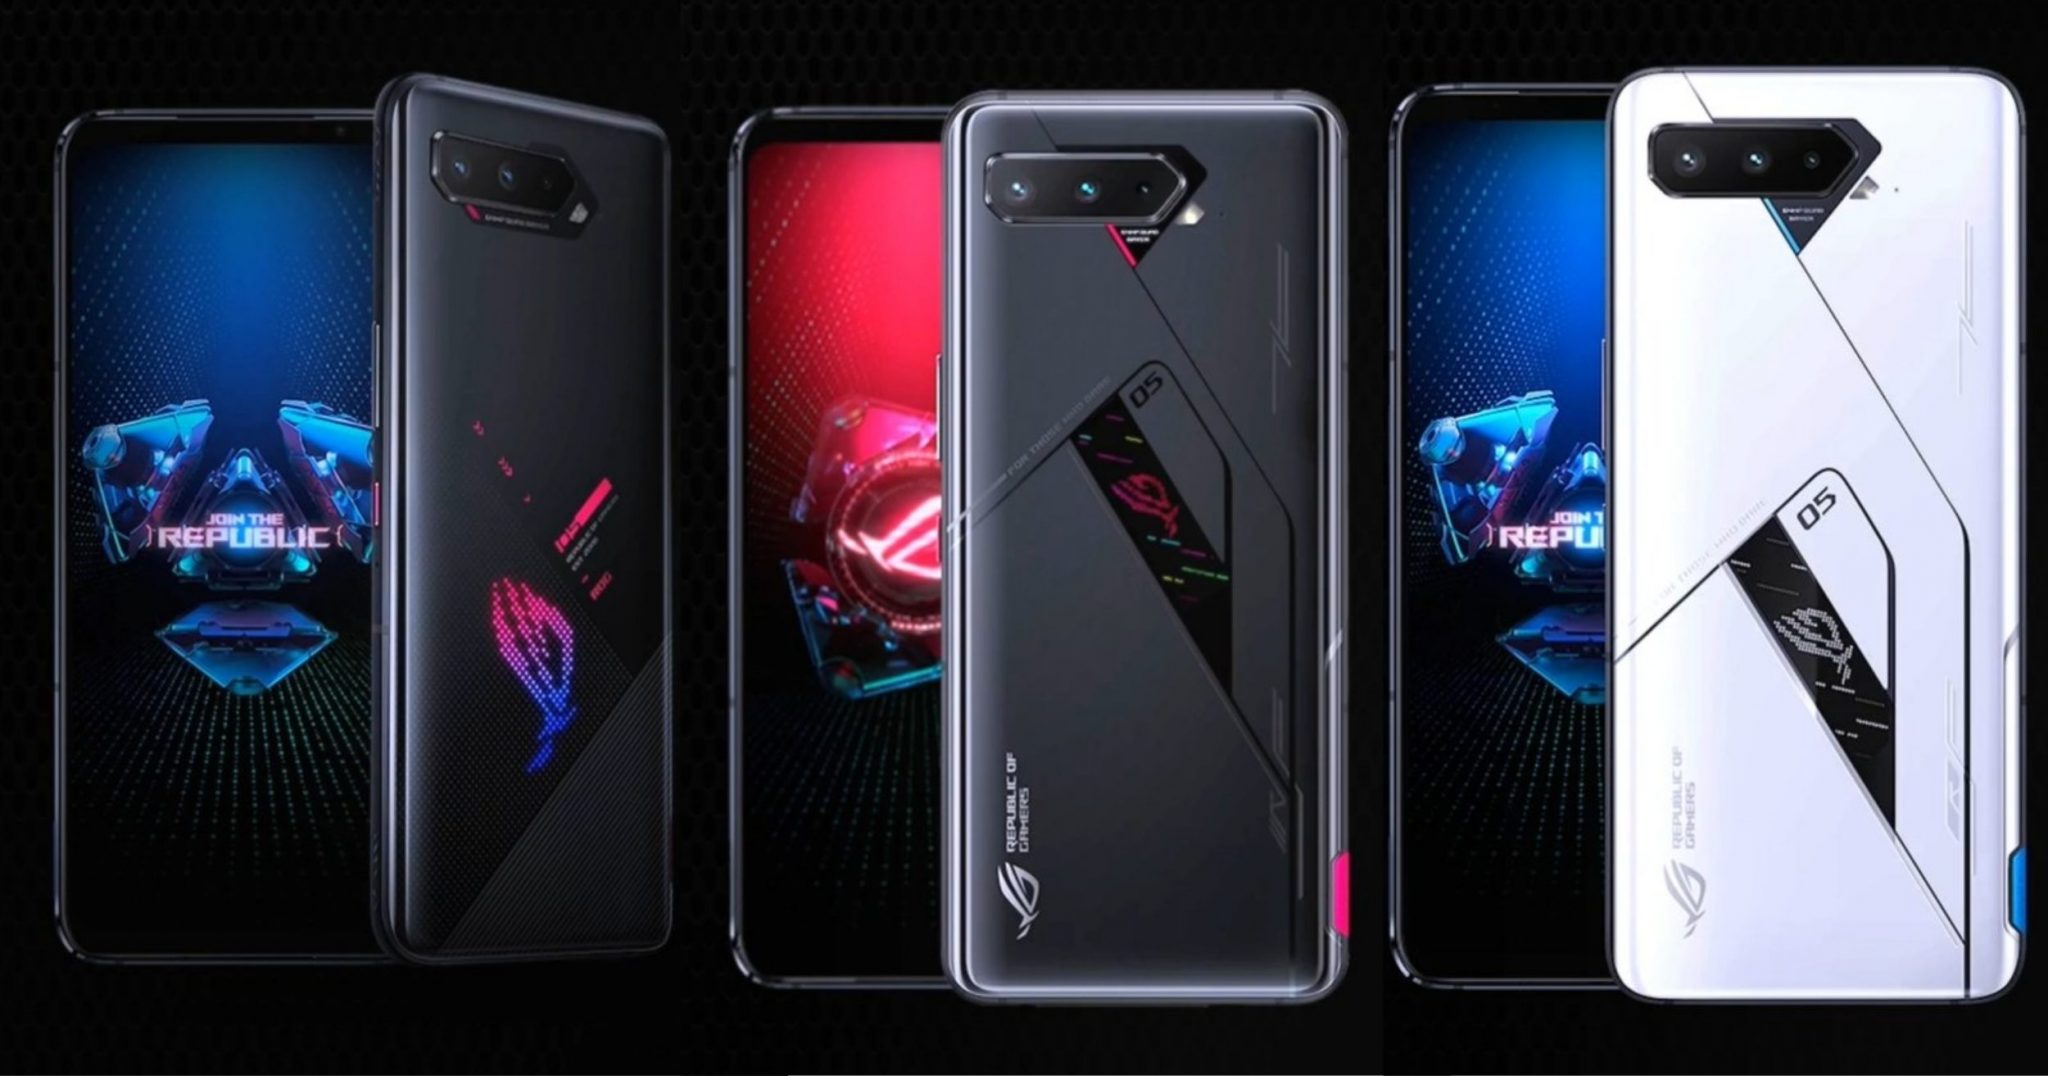 The Main Difference Between ASUS ROG Phone 5, ROG 5 Pro, and ROG 5 Ultimate